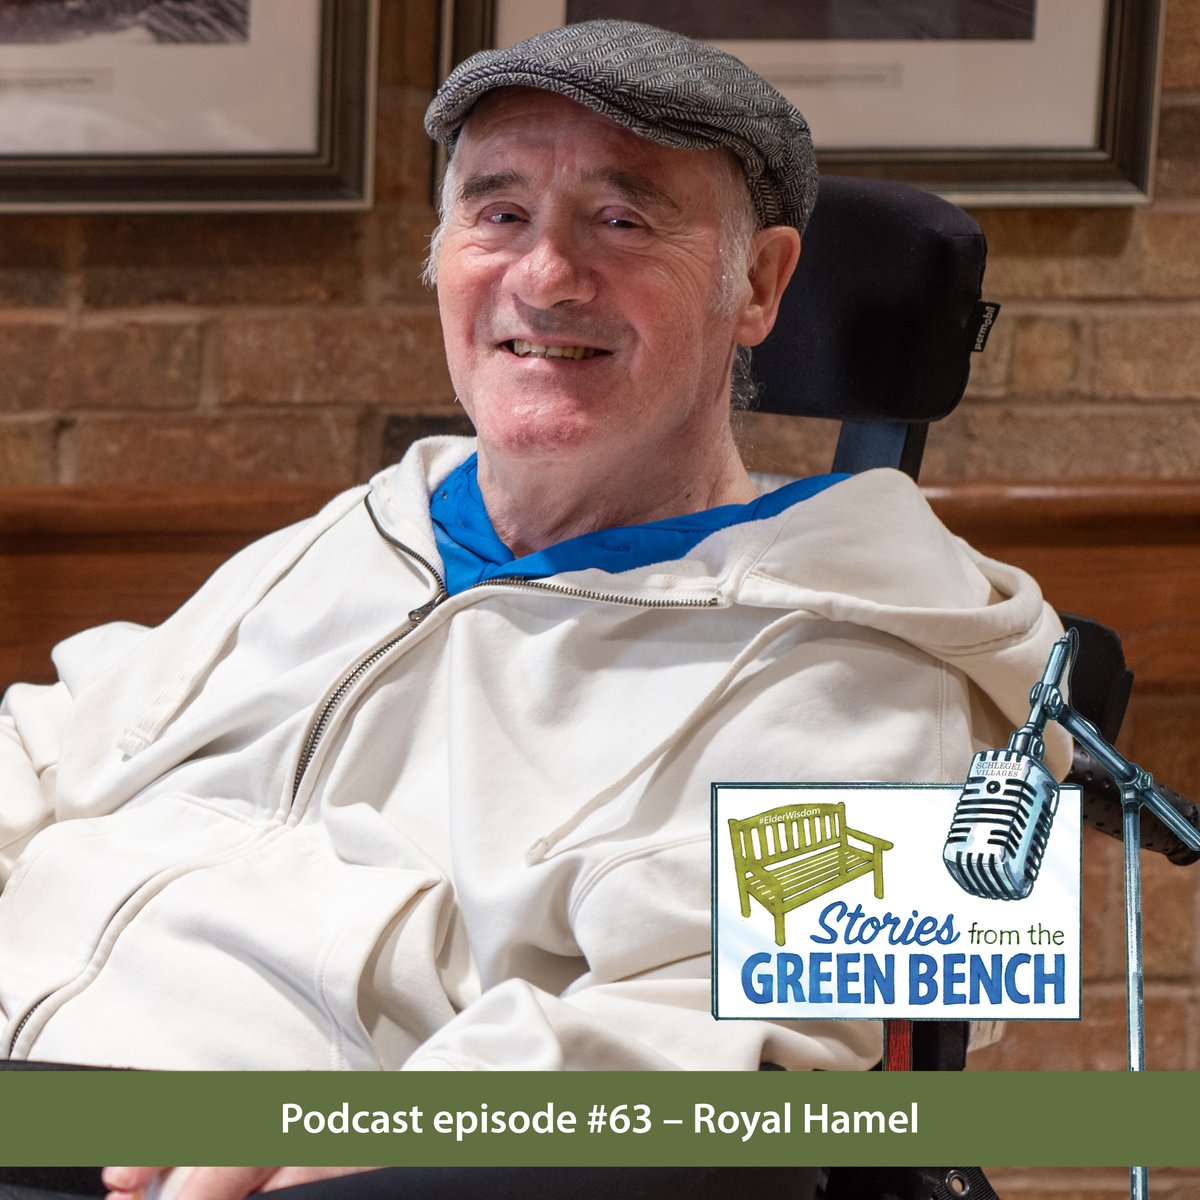 Join us on the Green Bench for an inspiring conversation with Royal, a pastor with a powerful story of faith and resilience. Listen to his wisdom on #ElderWisdom | Stories from the Green Bench podcast. schlegelvillages.com/podcast/episod… #Inspiration #Faith #Compassion #Podcast